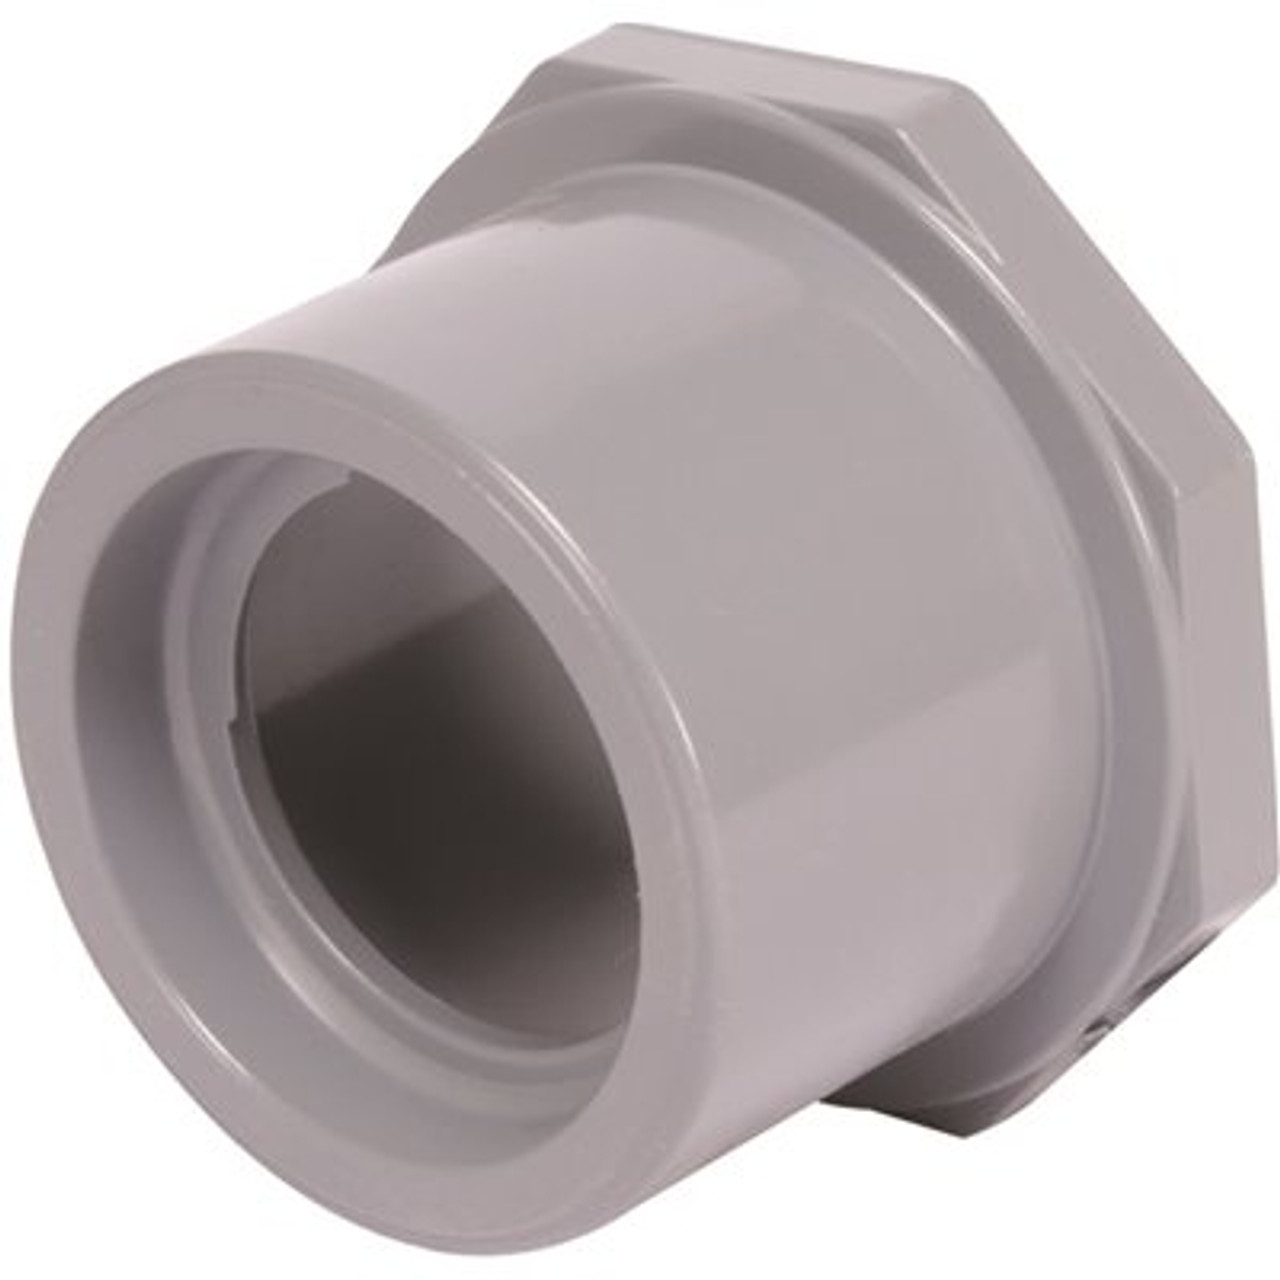 IPEX 2 In. X 1-1/2 In. Cpvc Fgv Hex Head Reducer Bushing Sp X H